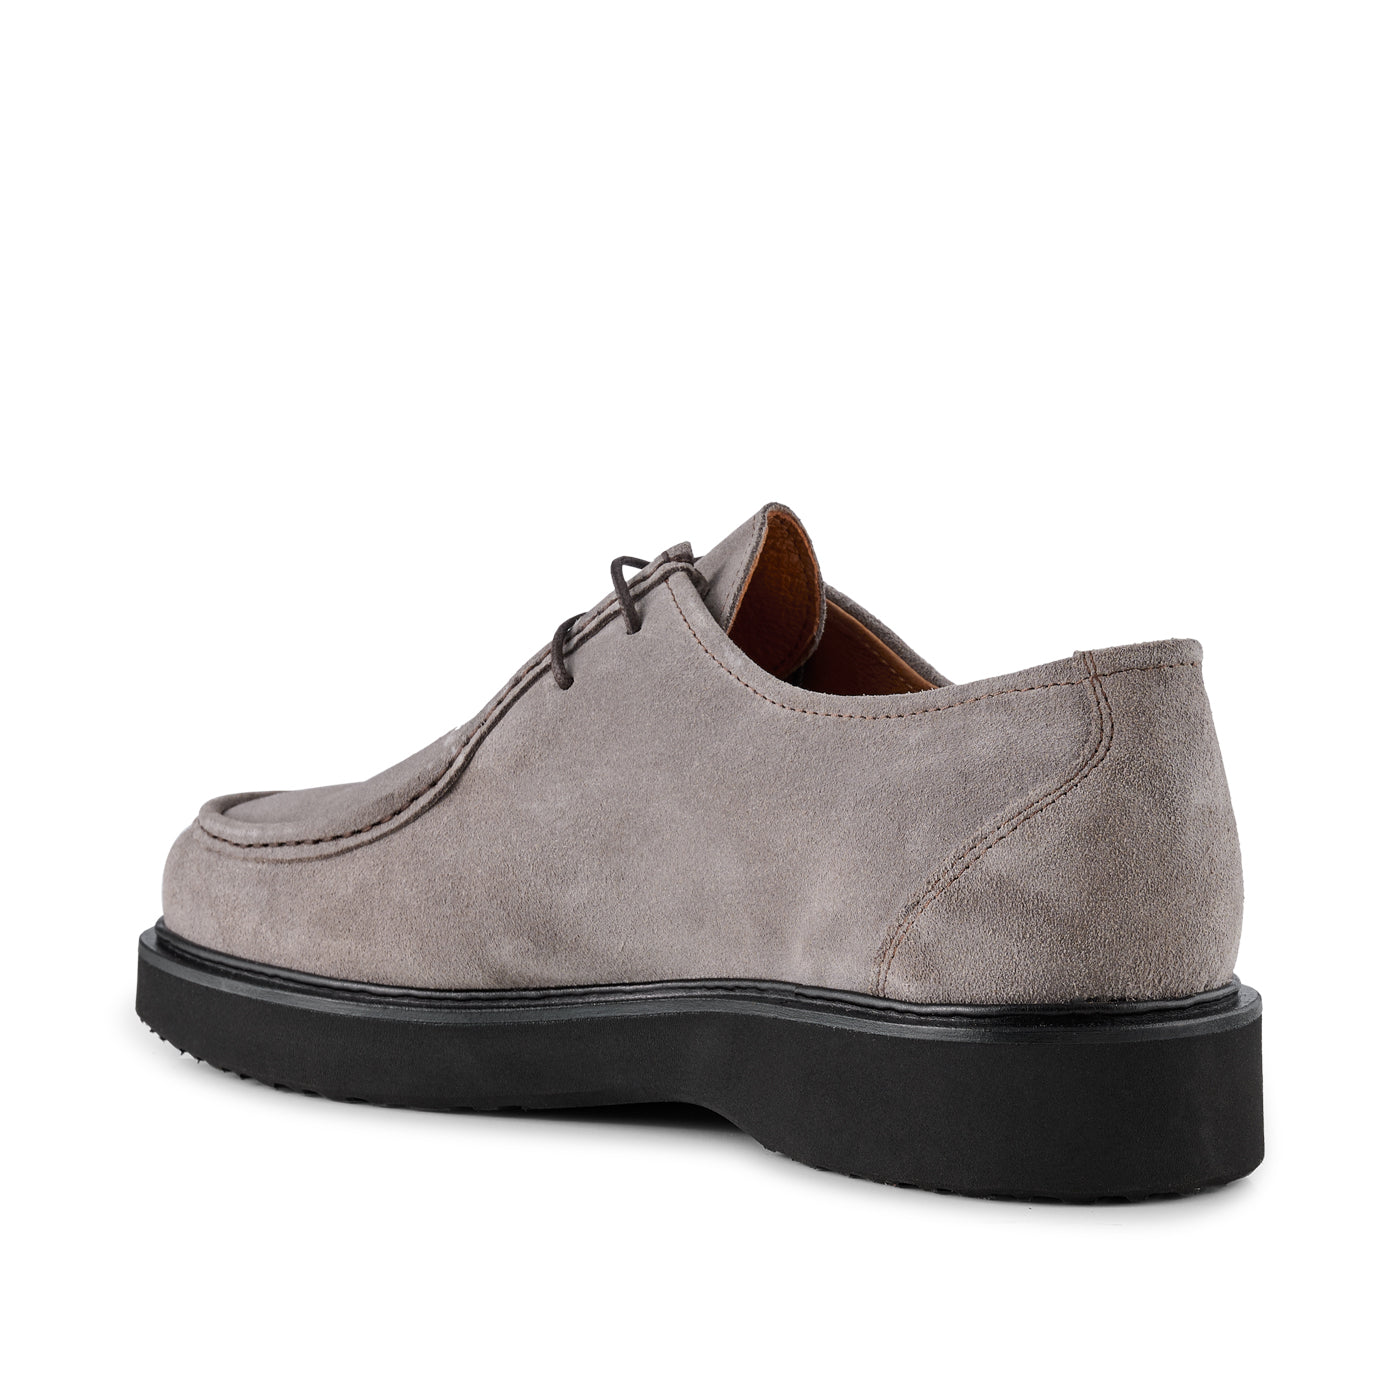 SHOE THE BEAR MENS Cosmos apron sko ruskind Shoes 160 TAUPE